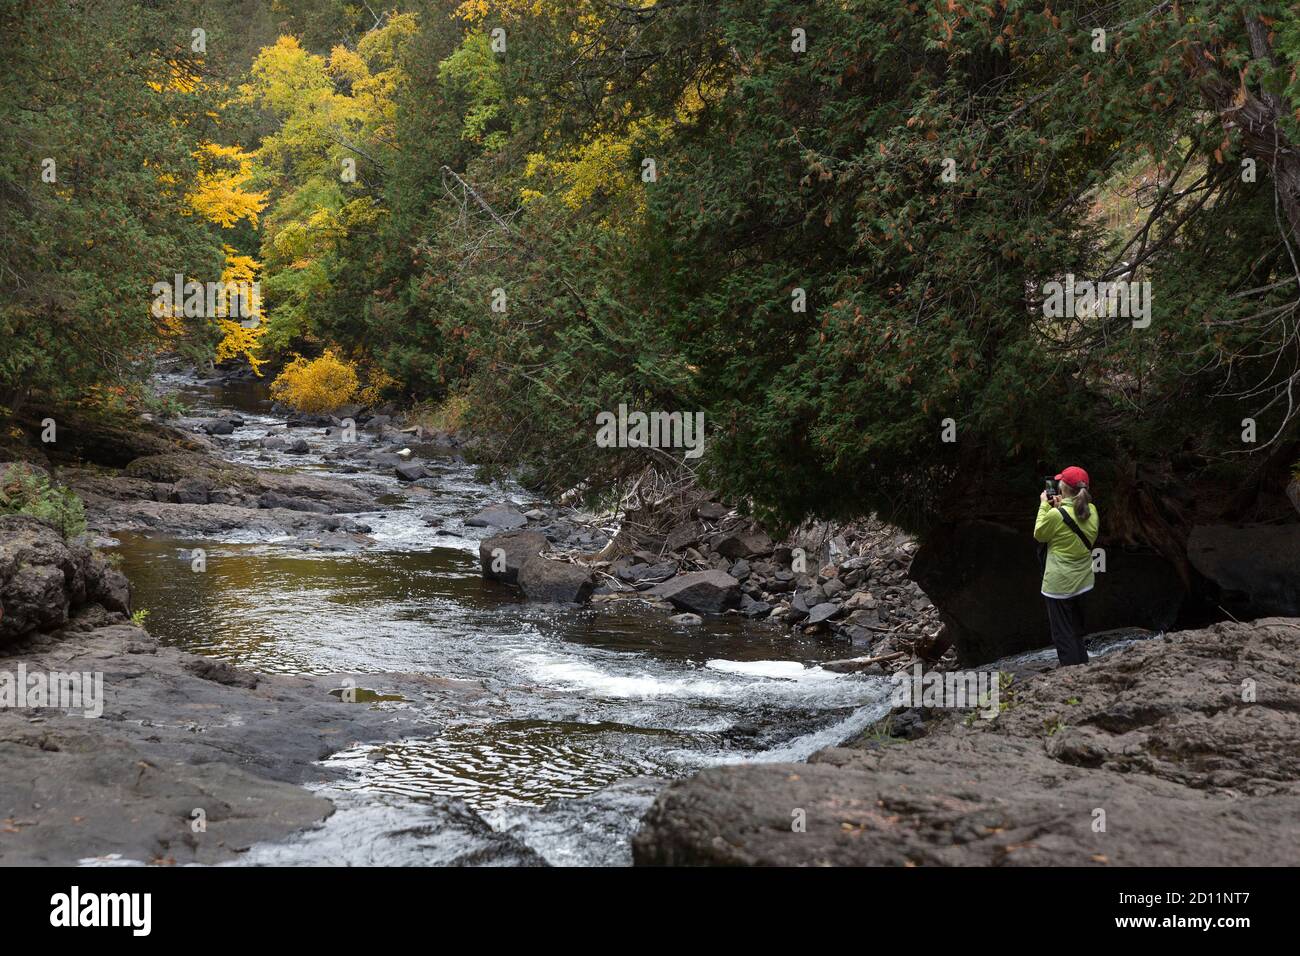 Tourist photographing landscape scenery in Cascade River State Park along the North Shore of Lake Superior, Minnesota Stock Photo